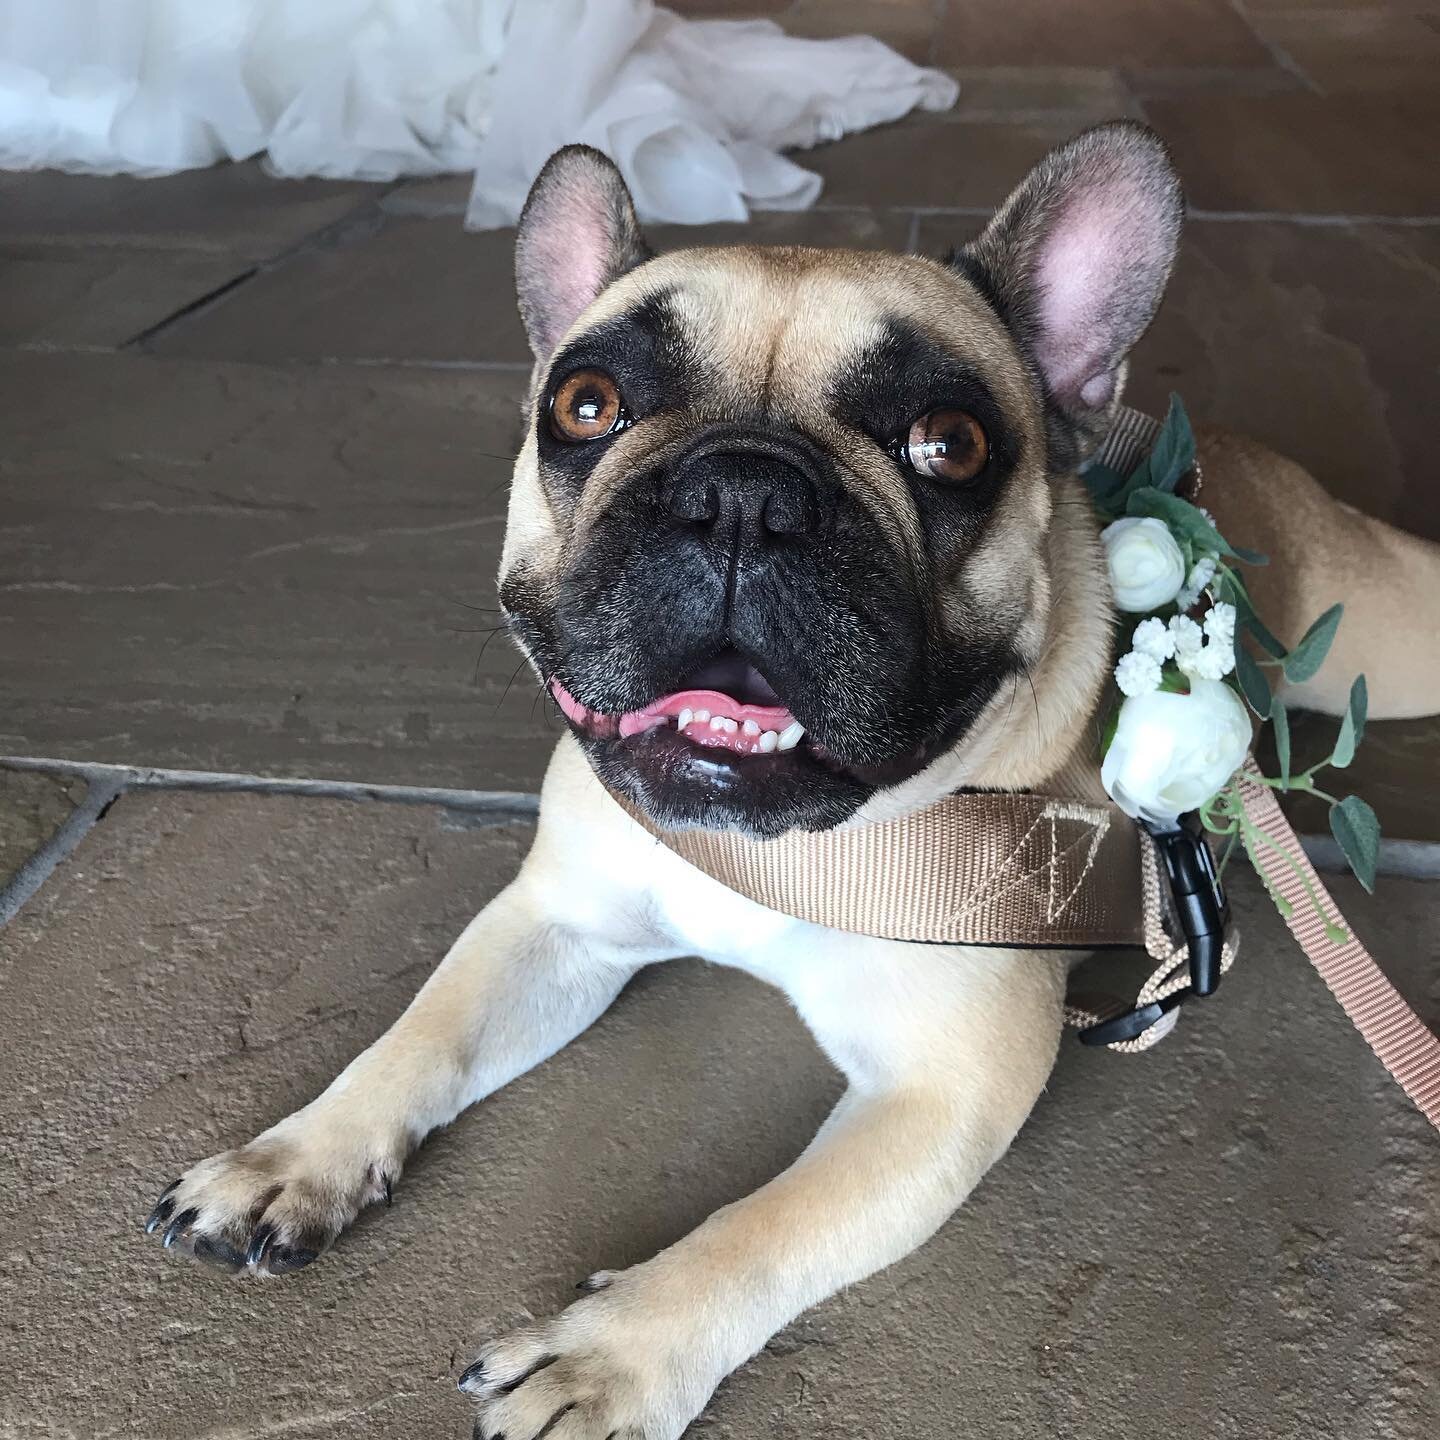 Such a little sweetheart 💗 #frenchbulldog #weddingchaperone #woofsquad #cheshire